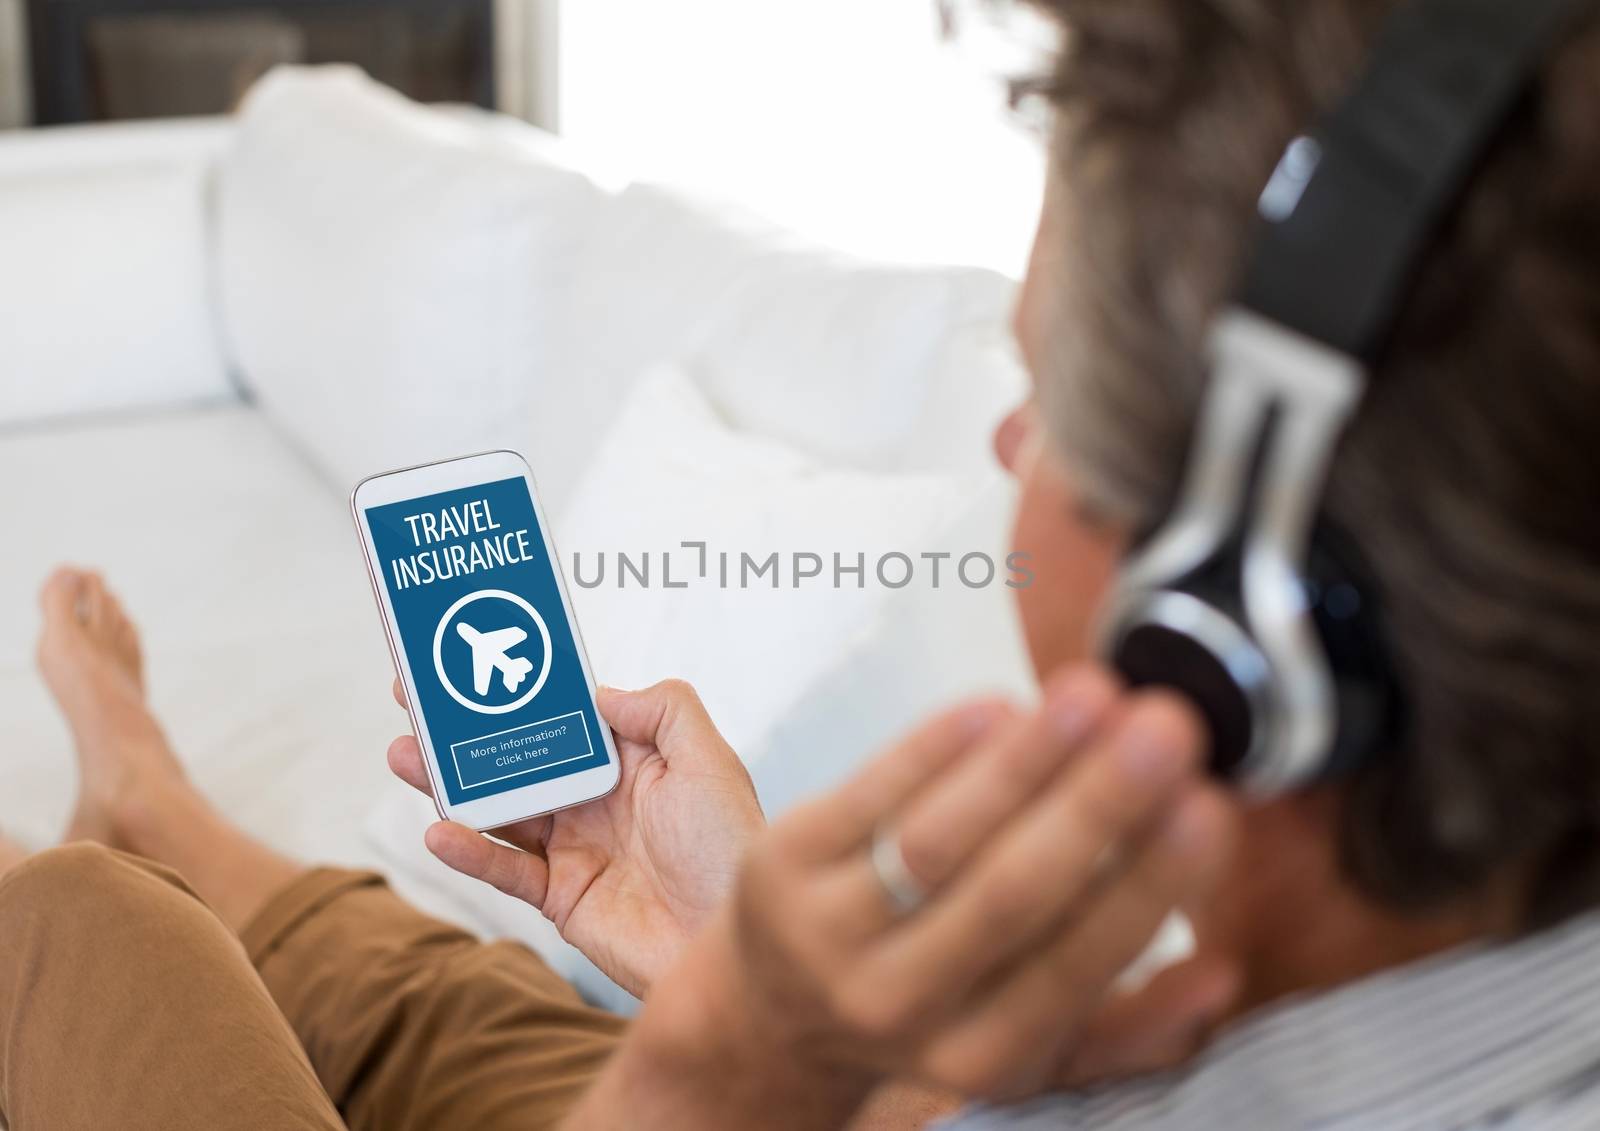 Man using a phone with travel insurance concept on screen by Wavebreakmedia